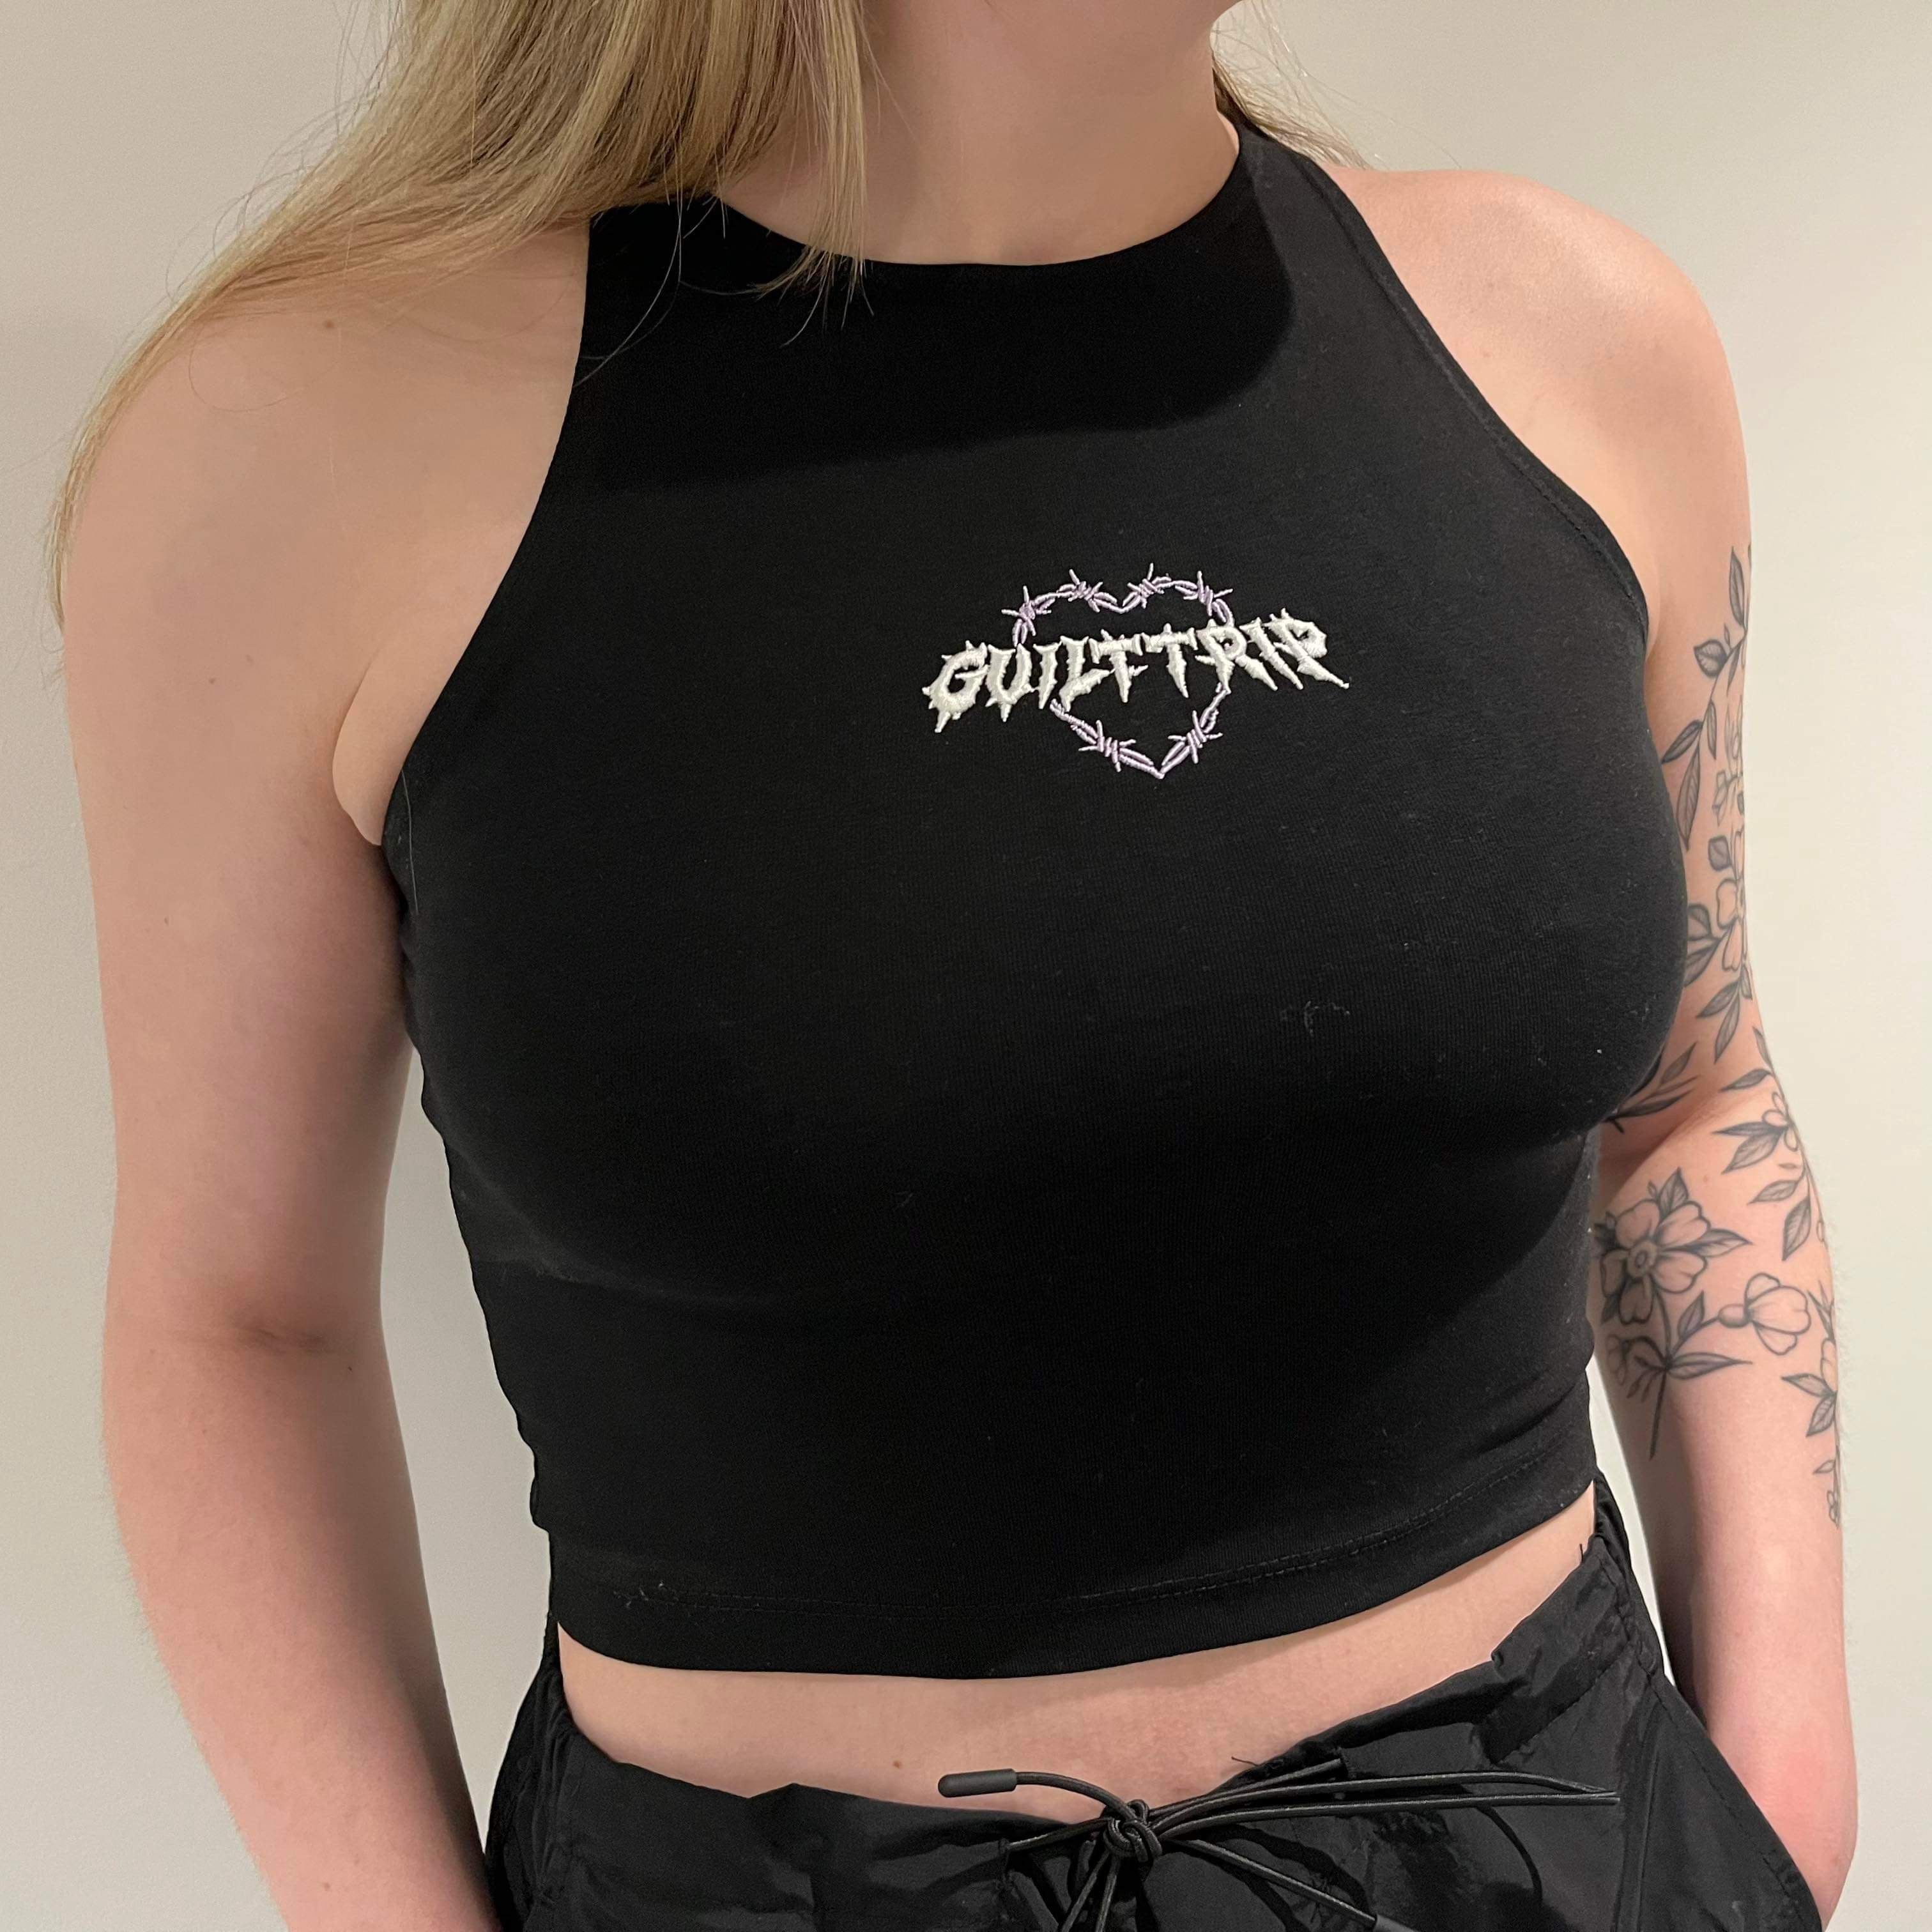 Guilt Trip Embroidered Crop Top